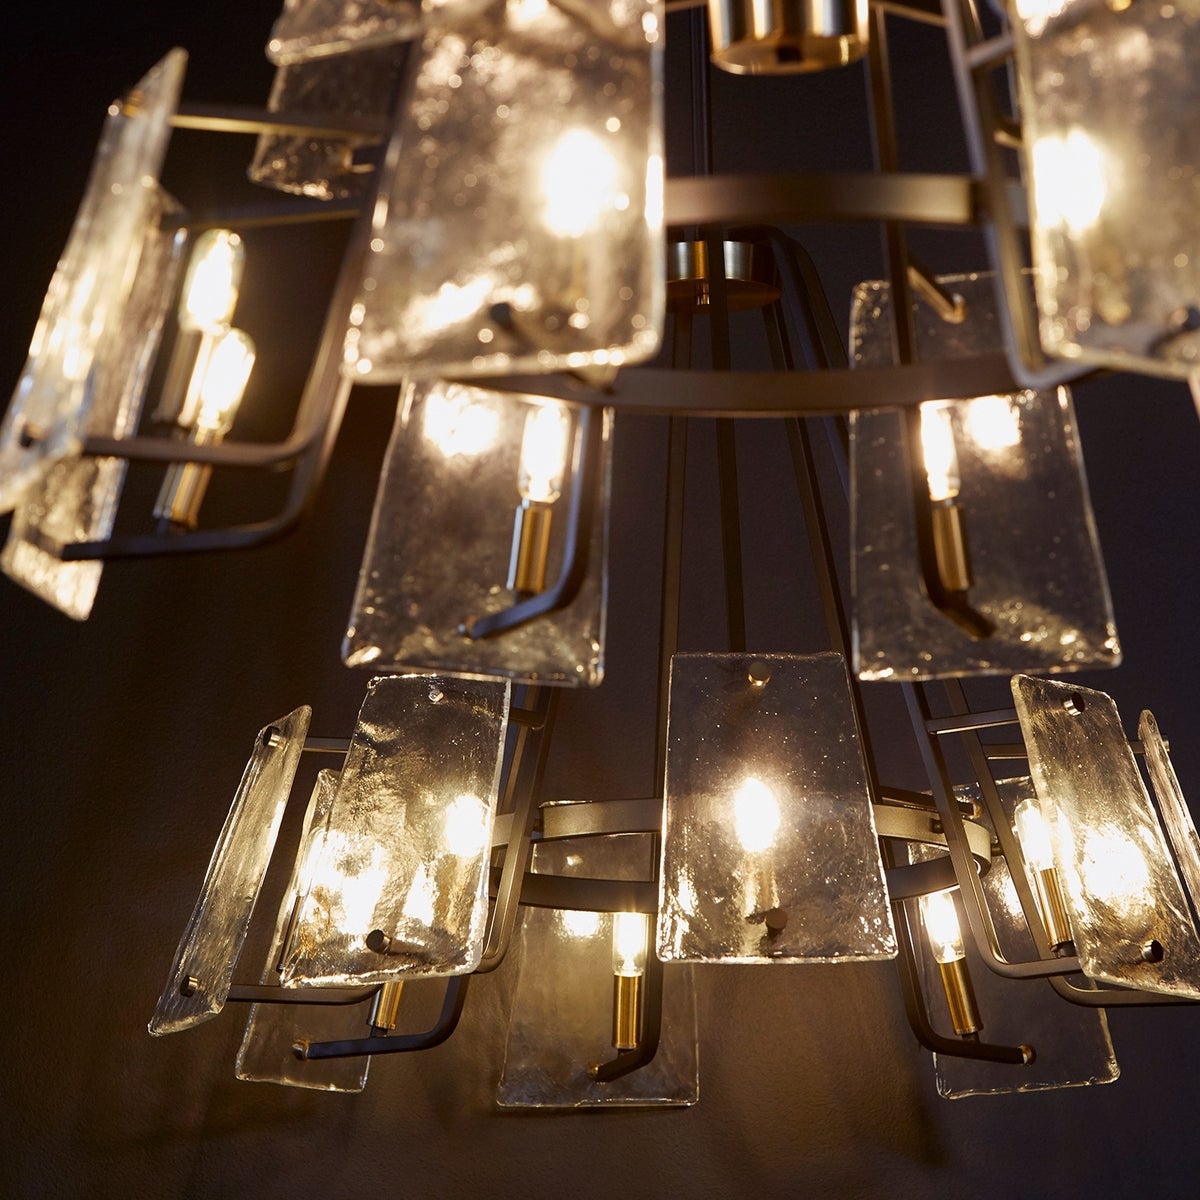 Outdoor chandelier with conical shape, frosted glass trapezoid shades, and aged brass-noir finish. Linear framing and angular accents create a mid-century modern inspired design. Features 12 light sockets orbiting the interior ring. Suitable for covered outdoor spaces or washrooms.